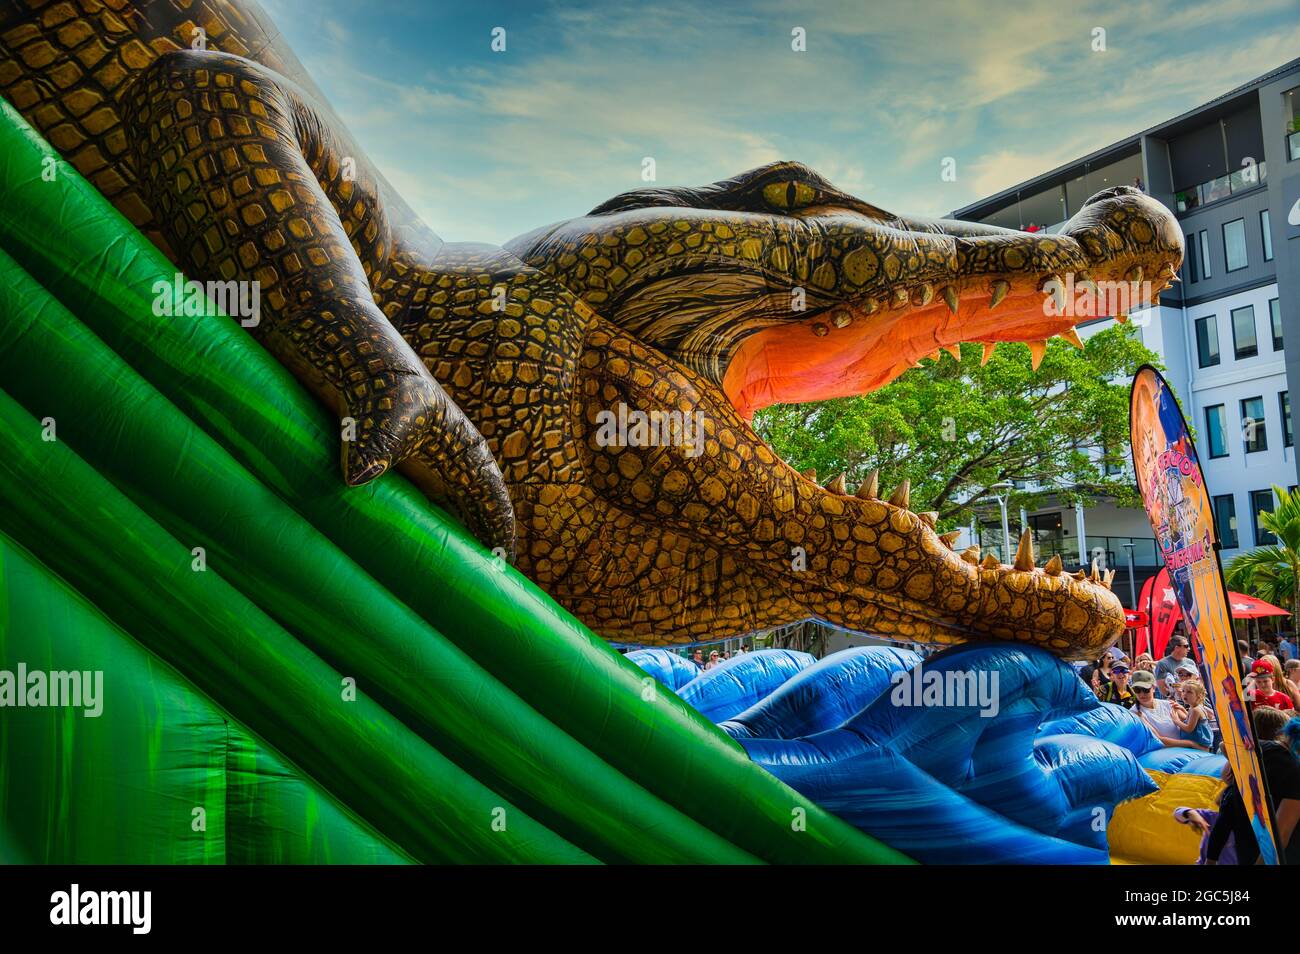 A gathered crowd around the colourful crocodile slide at the opening of the new Esplanade presinct in Cairns, Queensland, Australia. Stock Photo